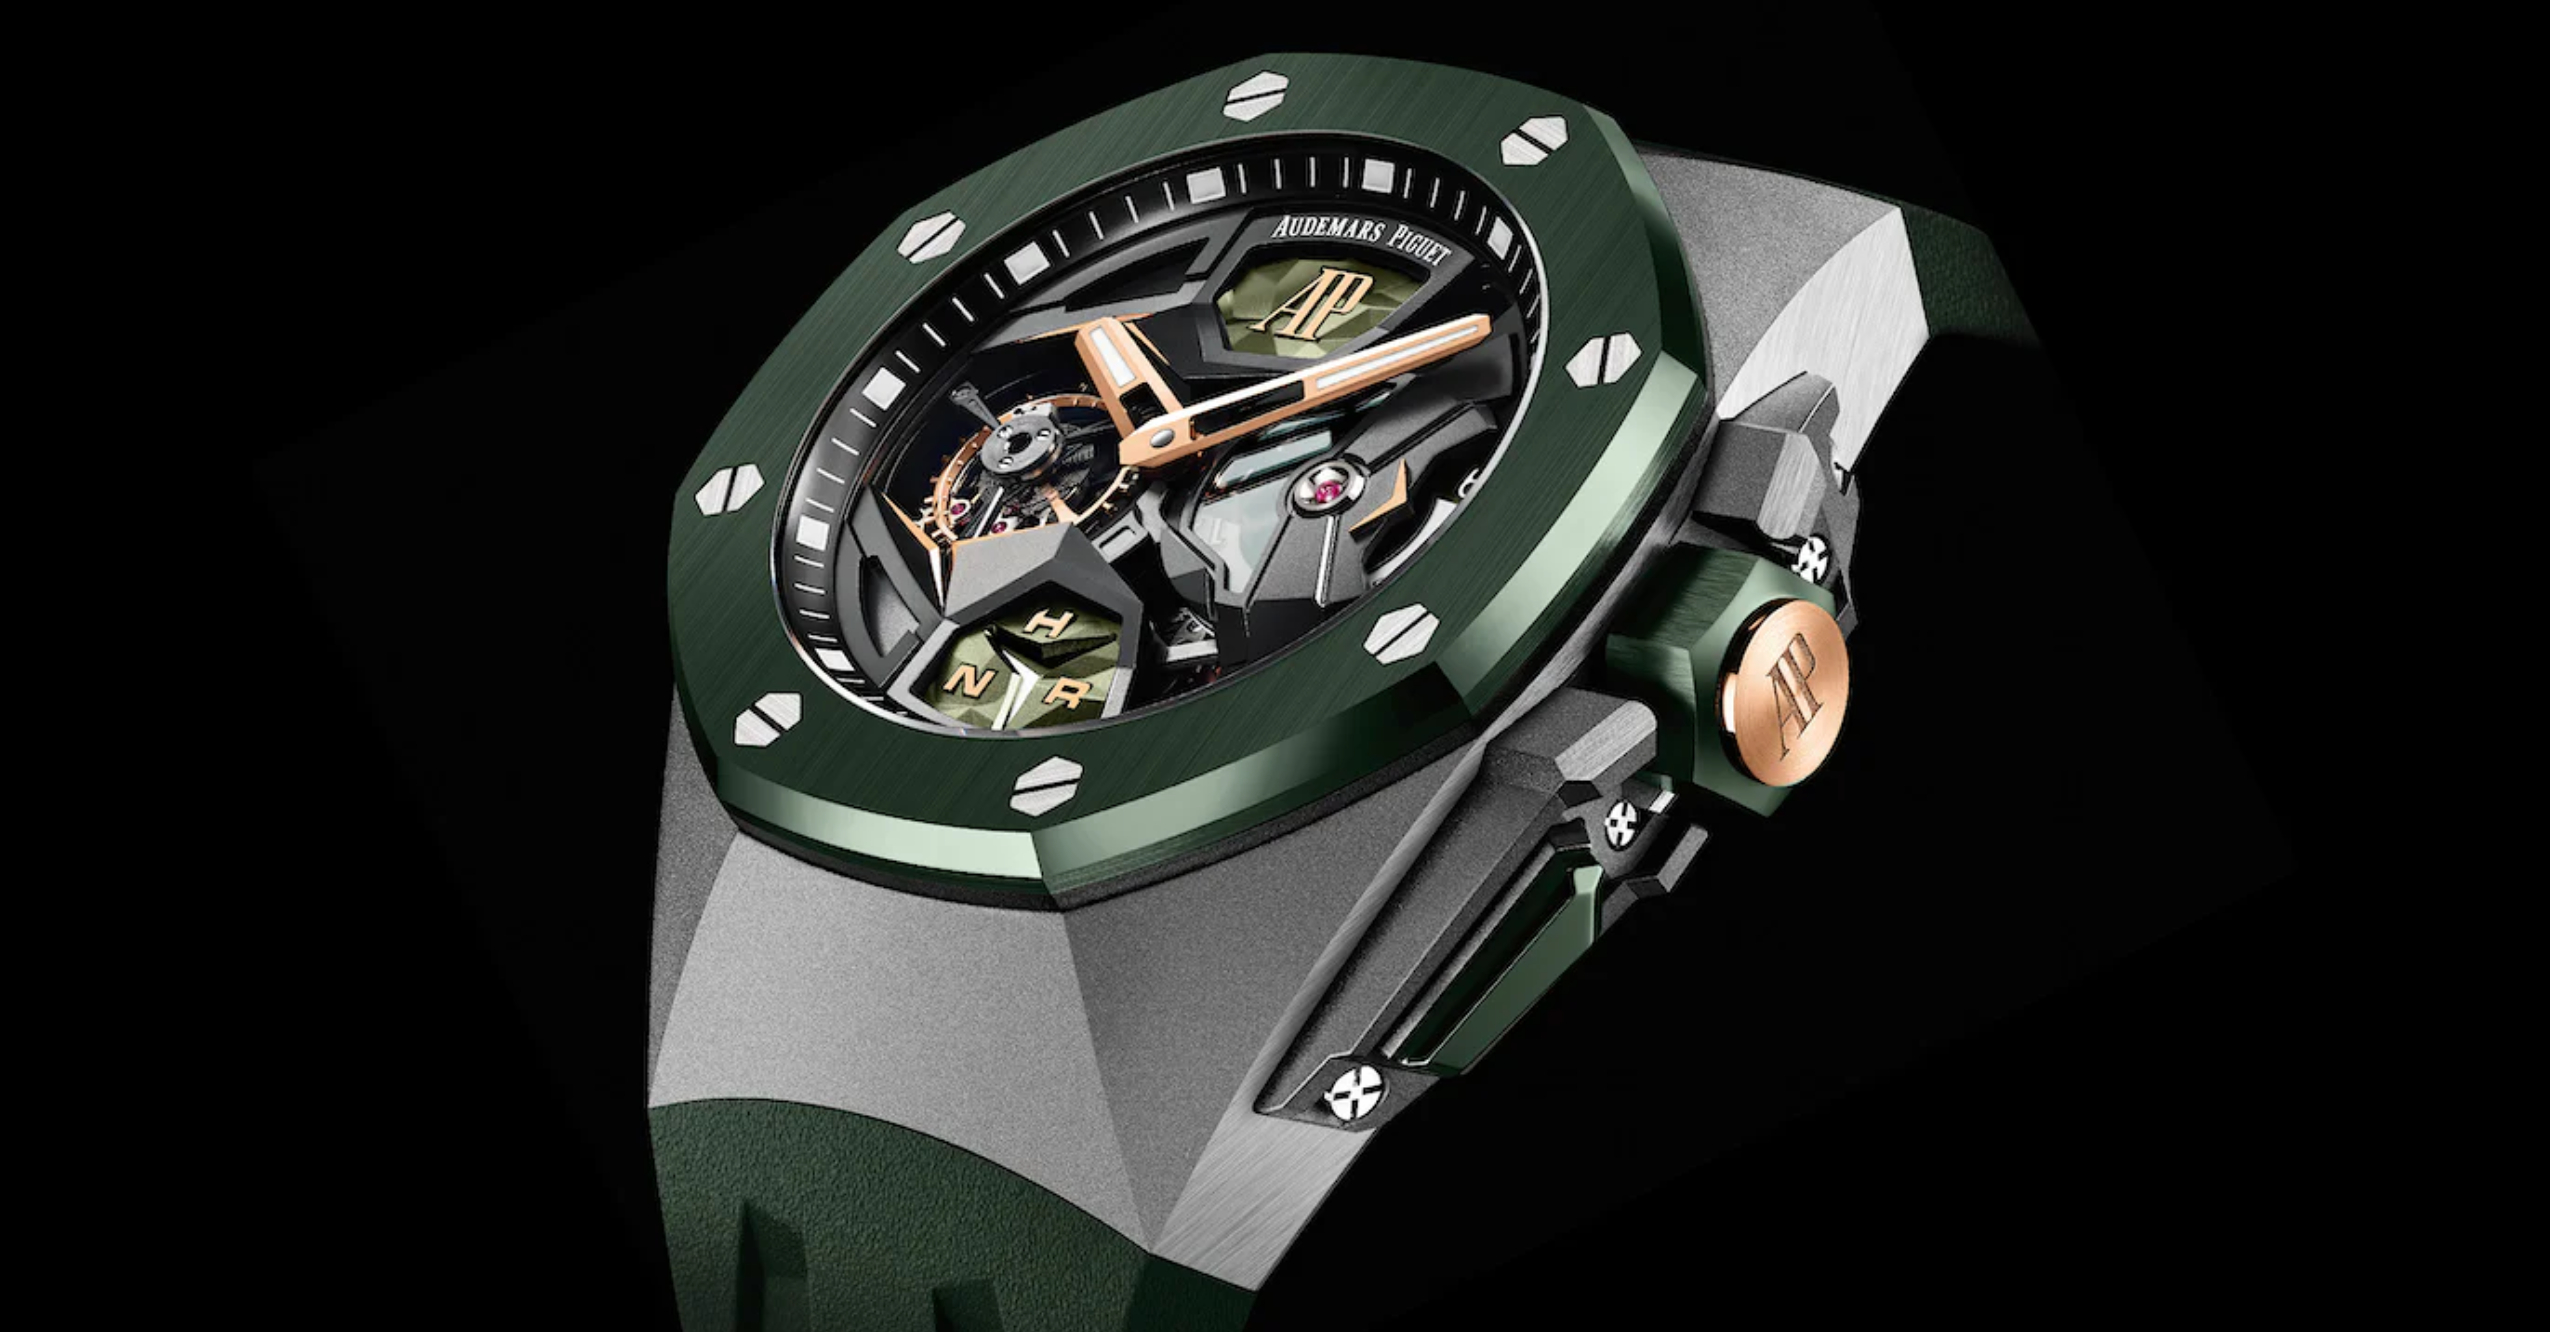 Audemars Piguet Celebrates 50 Years Of The Royal Oak With Green-Hued ...